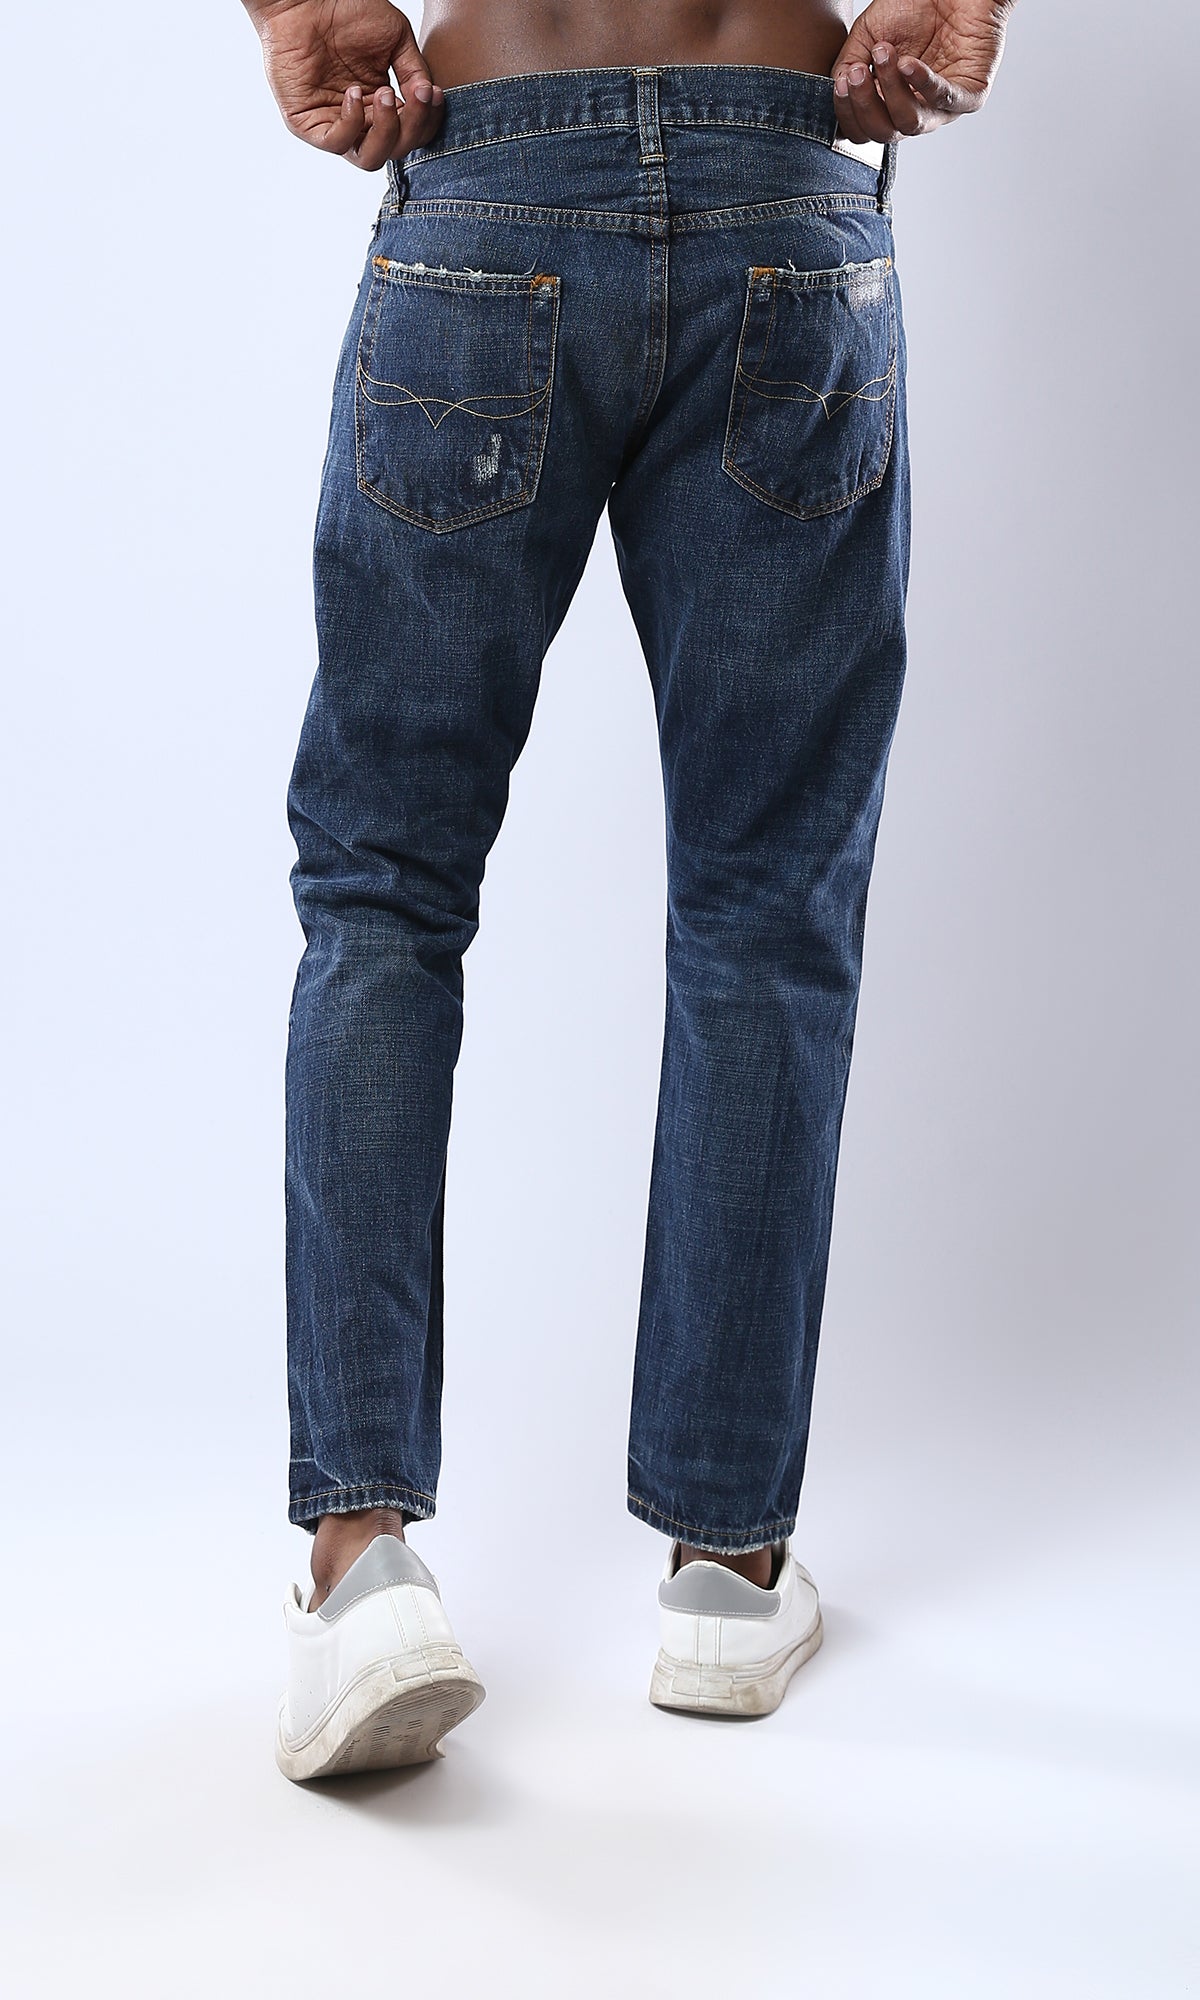 O178110 Navy Blue Stitched With Ripps Casual Jeans